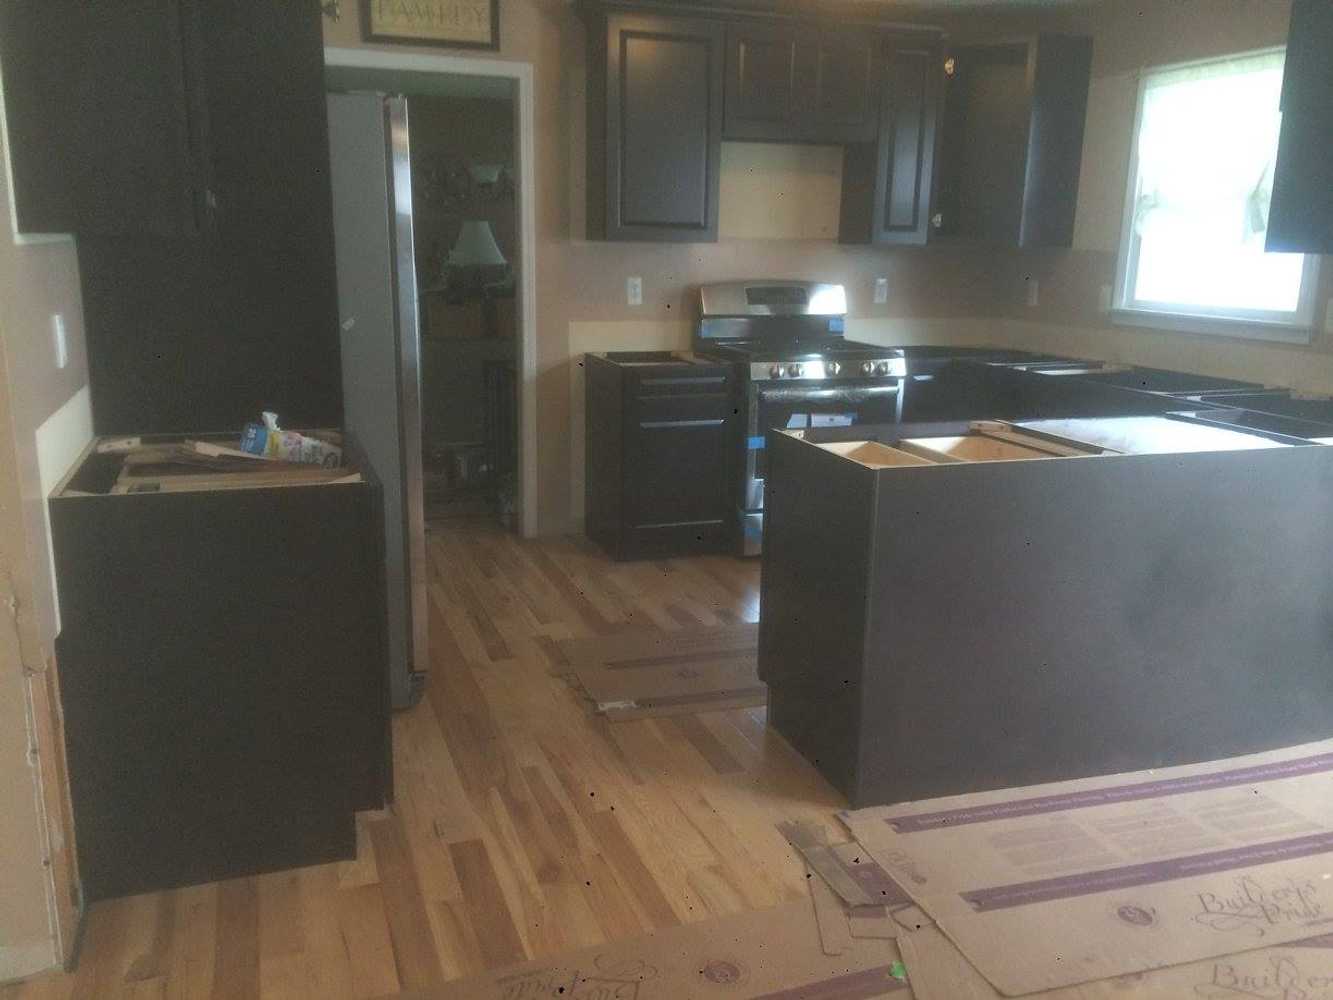 Kitchen and Flooring remodel from water damage